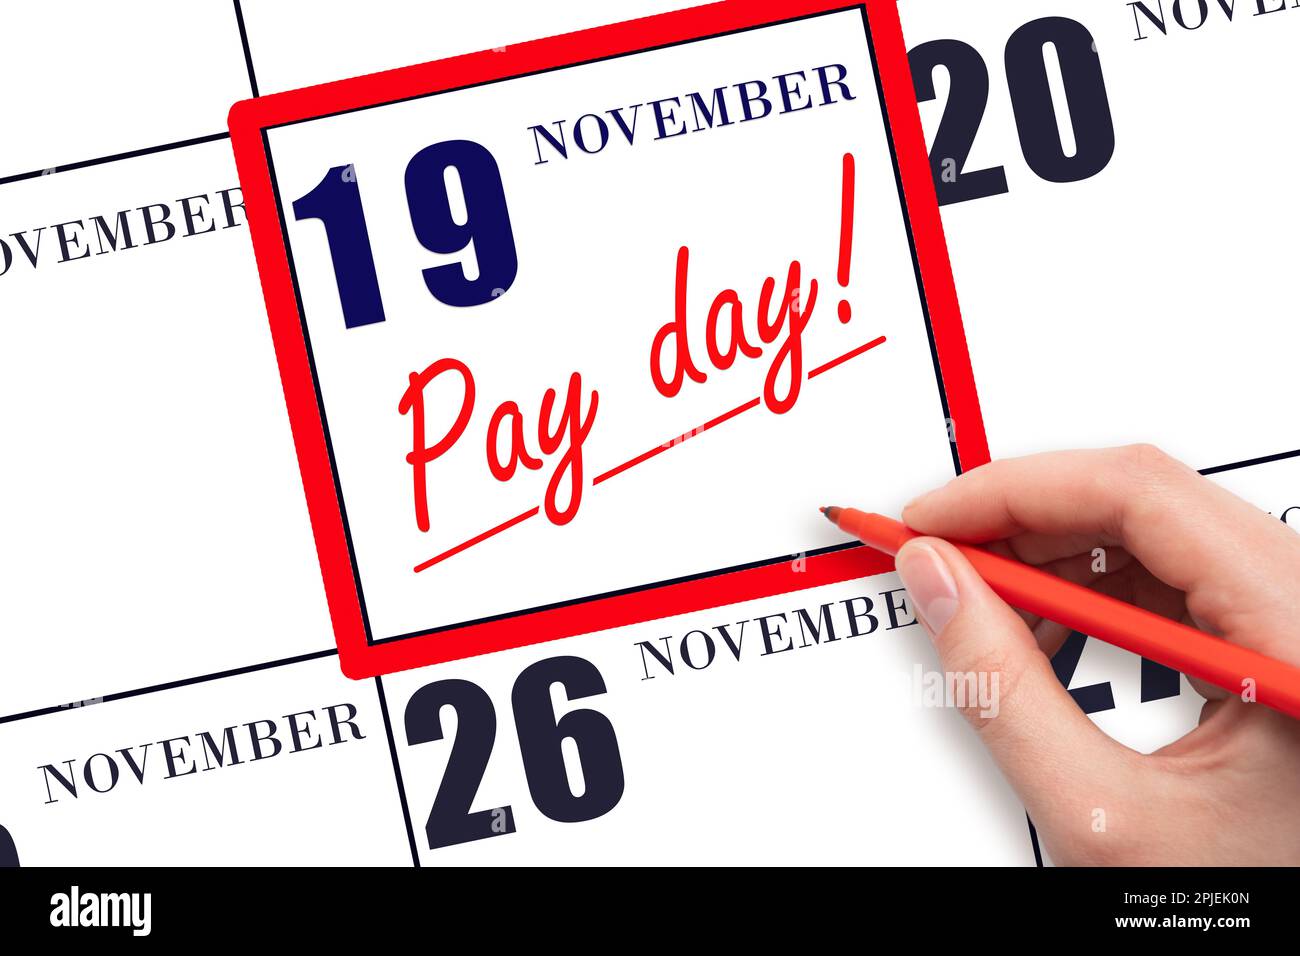 19th day of November. Hand writing text PAY DATE on calendar date November 19 and underline it. Payment due date. Reminder concept of payment. Autumn Stock Photo